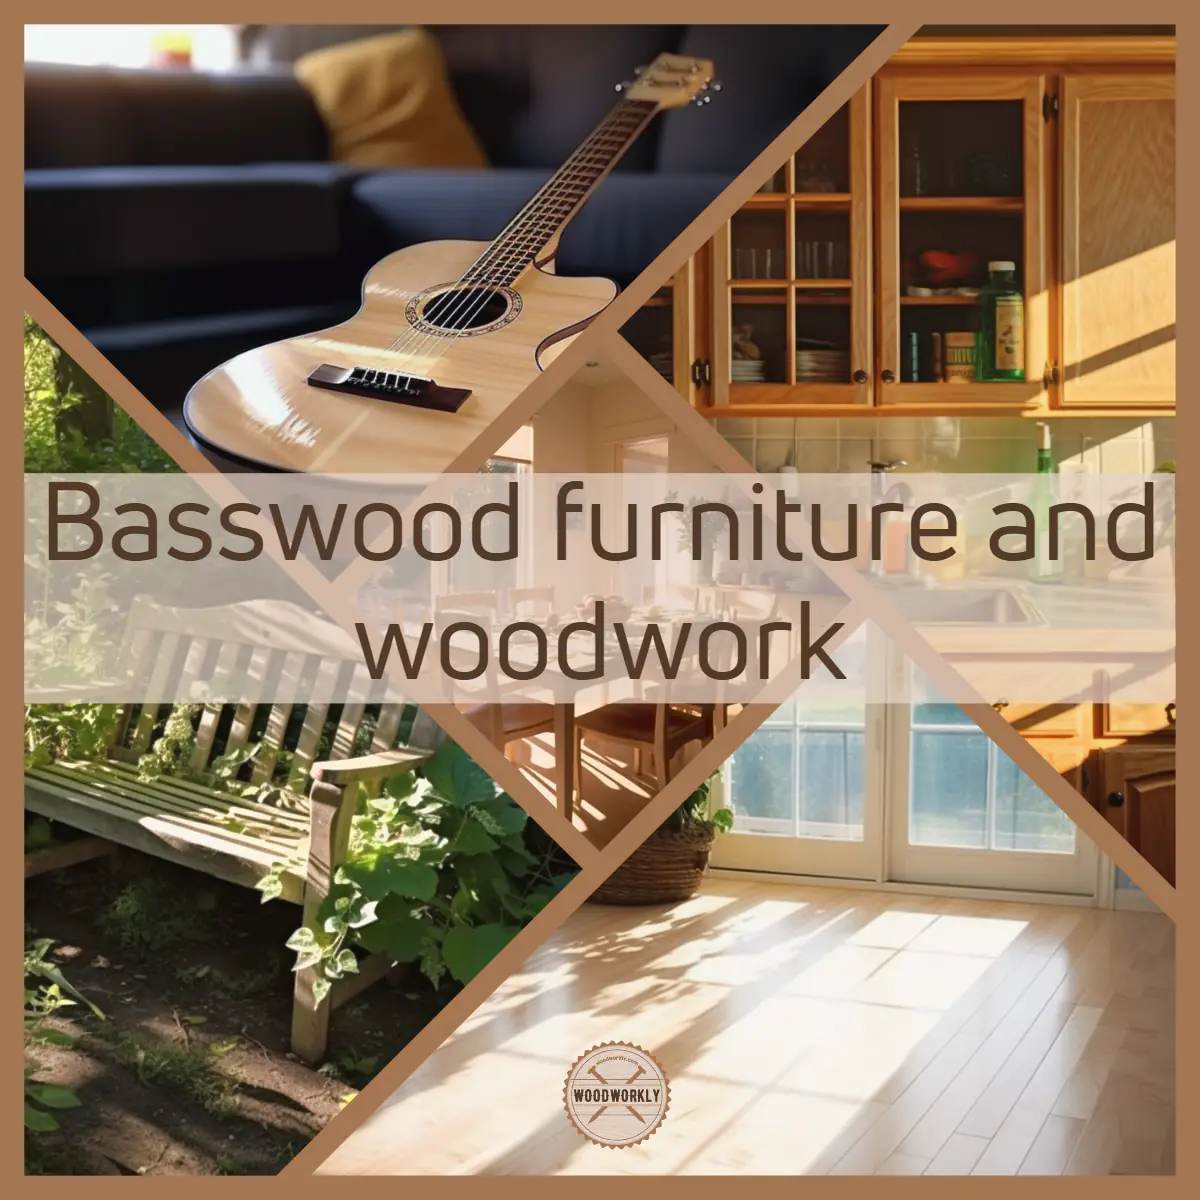 Basswood furniture and woodwork